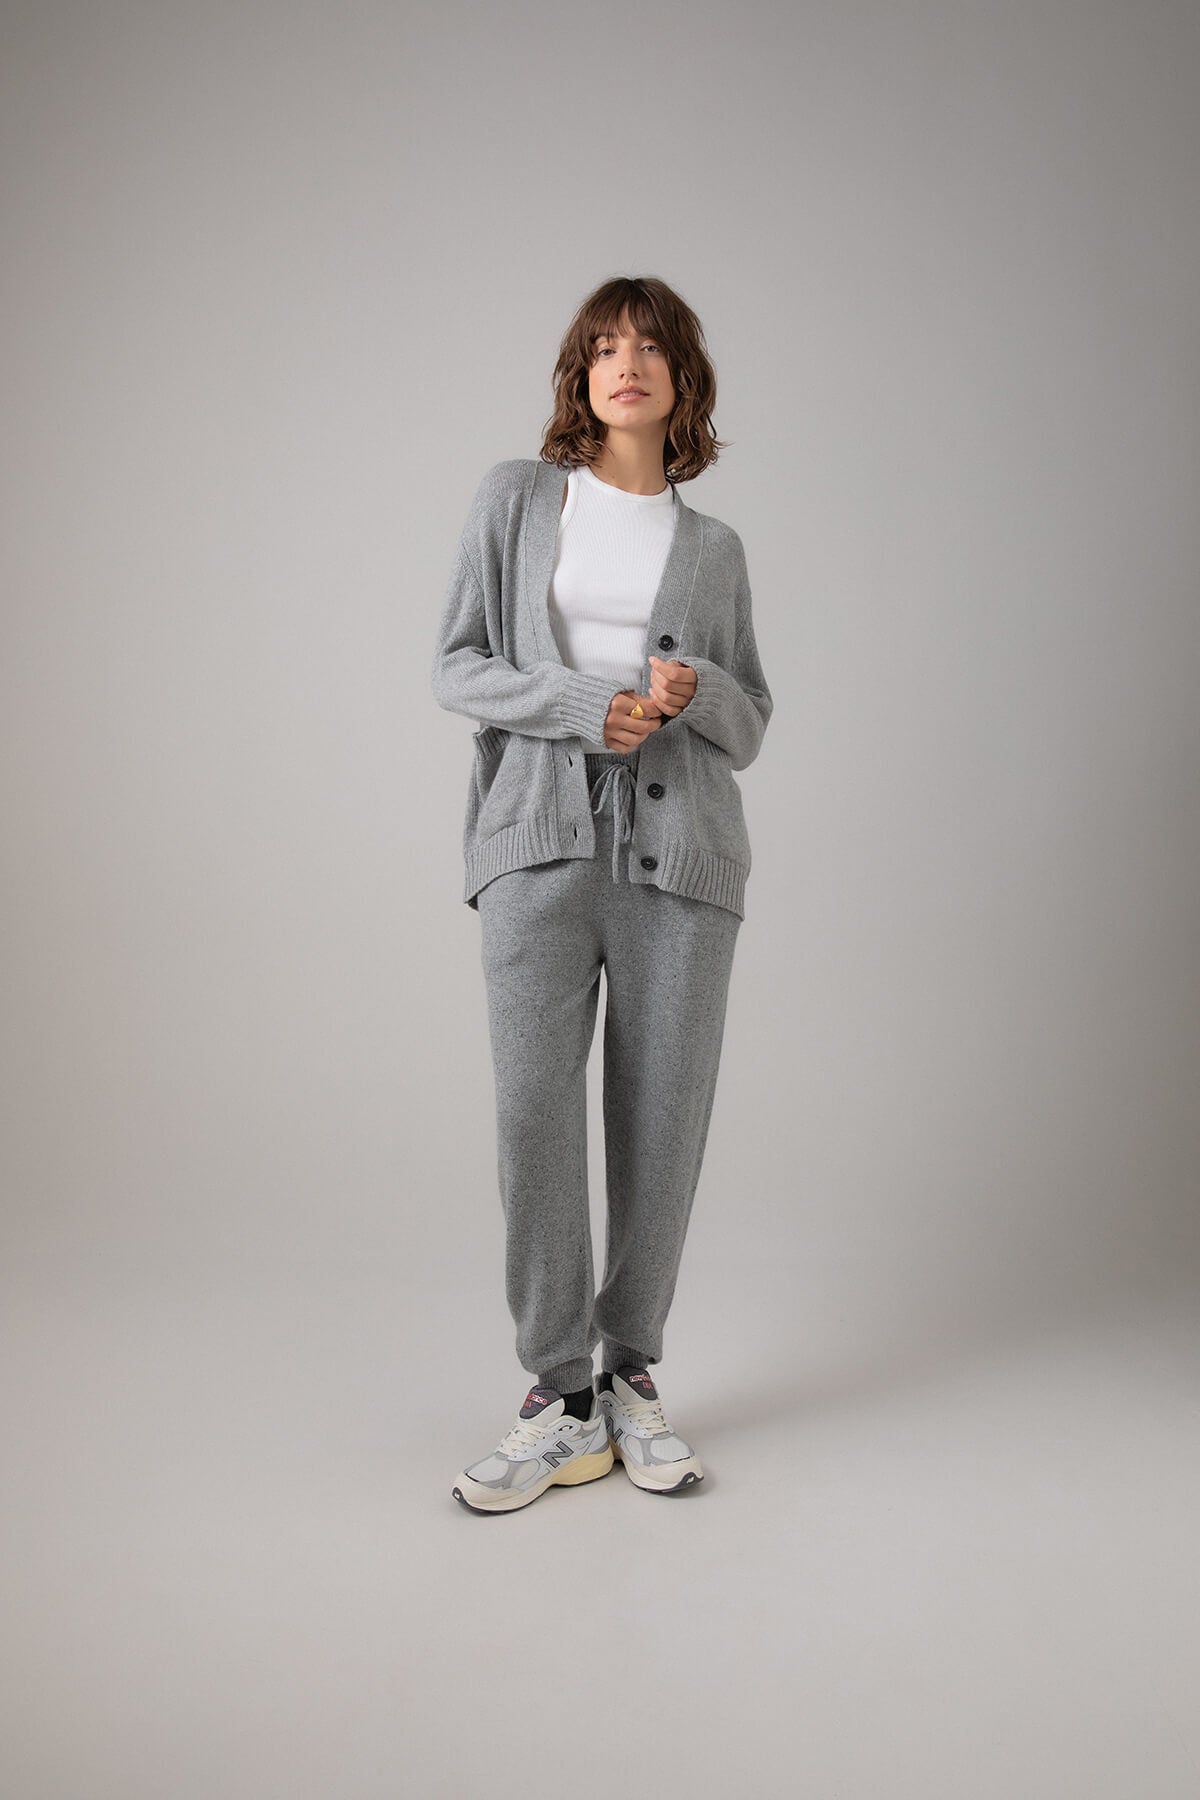 Johnstons of Elgin Women's Relaxed Fit Cashmere Cardigan in Light Grey worn with a White T-Shirt and Grey Cashmere Joggers KAC05087HA0308